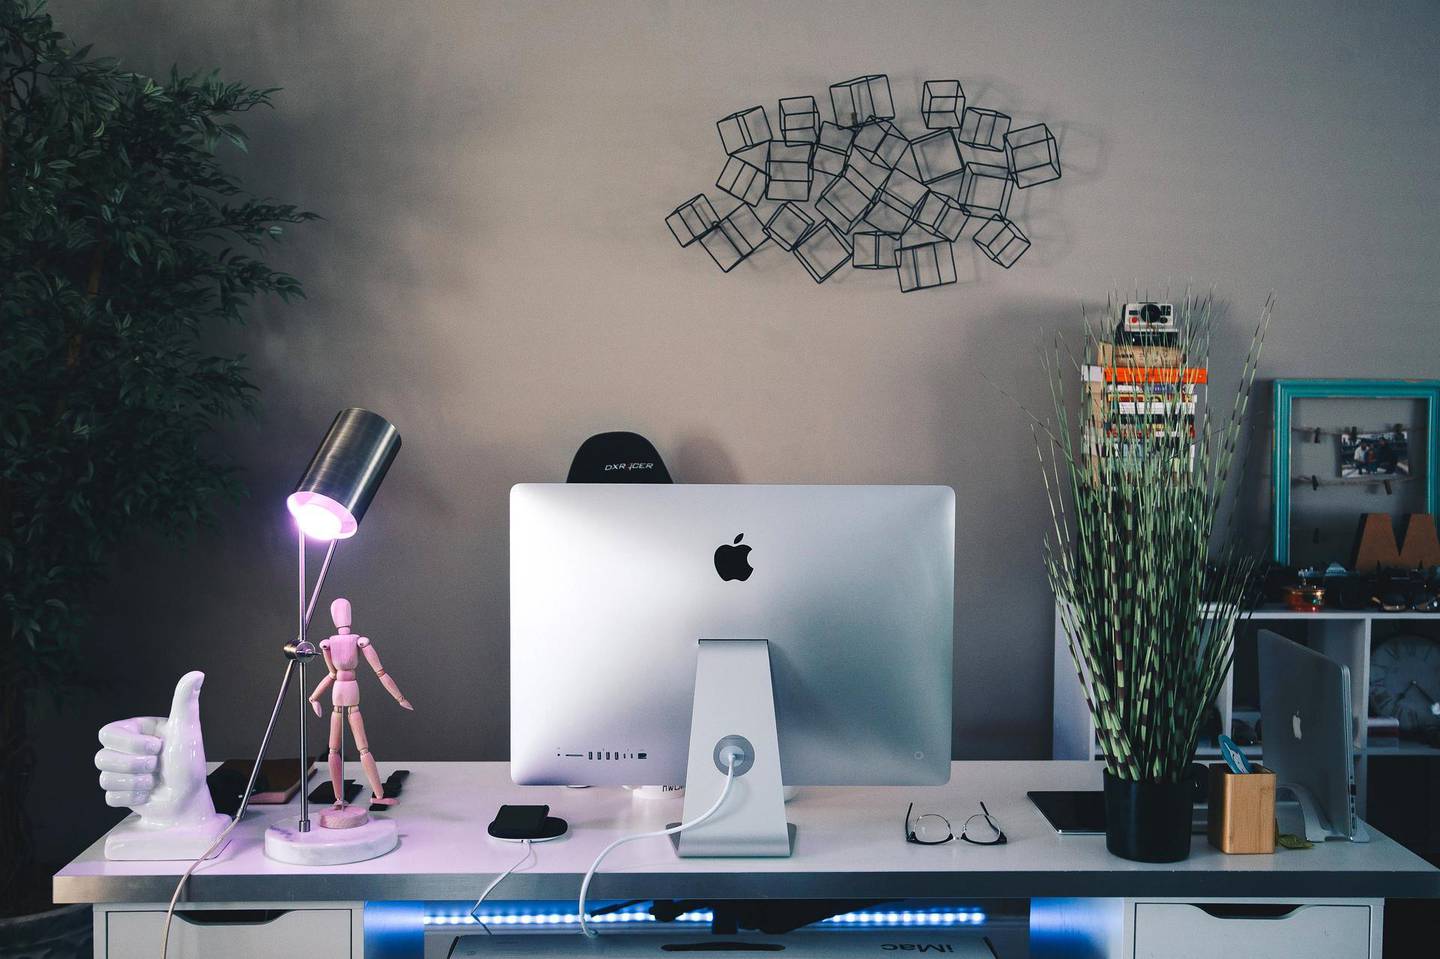 Adding personal touches can help brighten up your workspace. Med Badr Chemmaoui